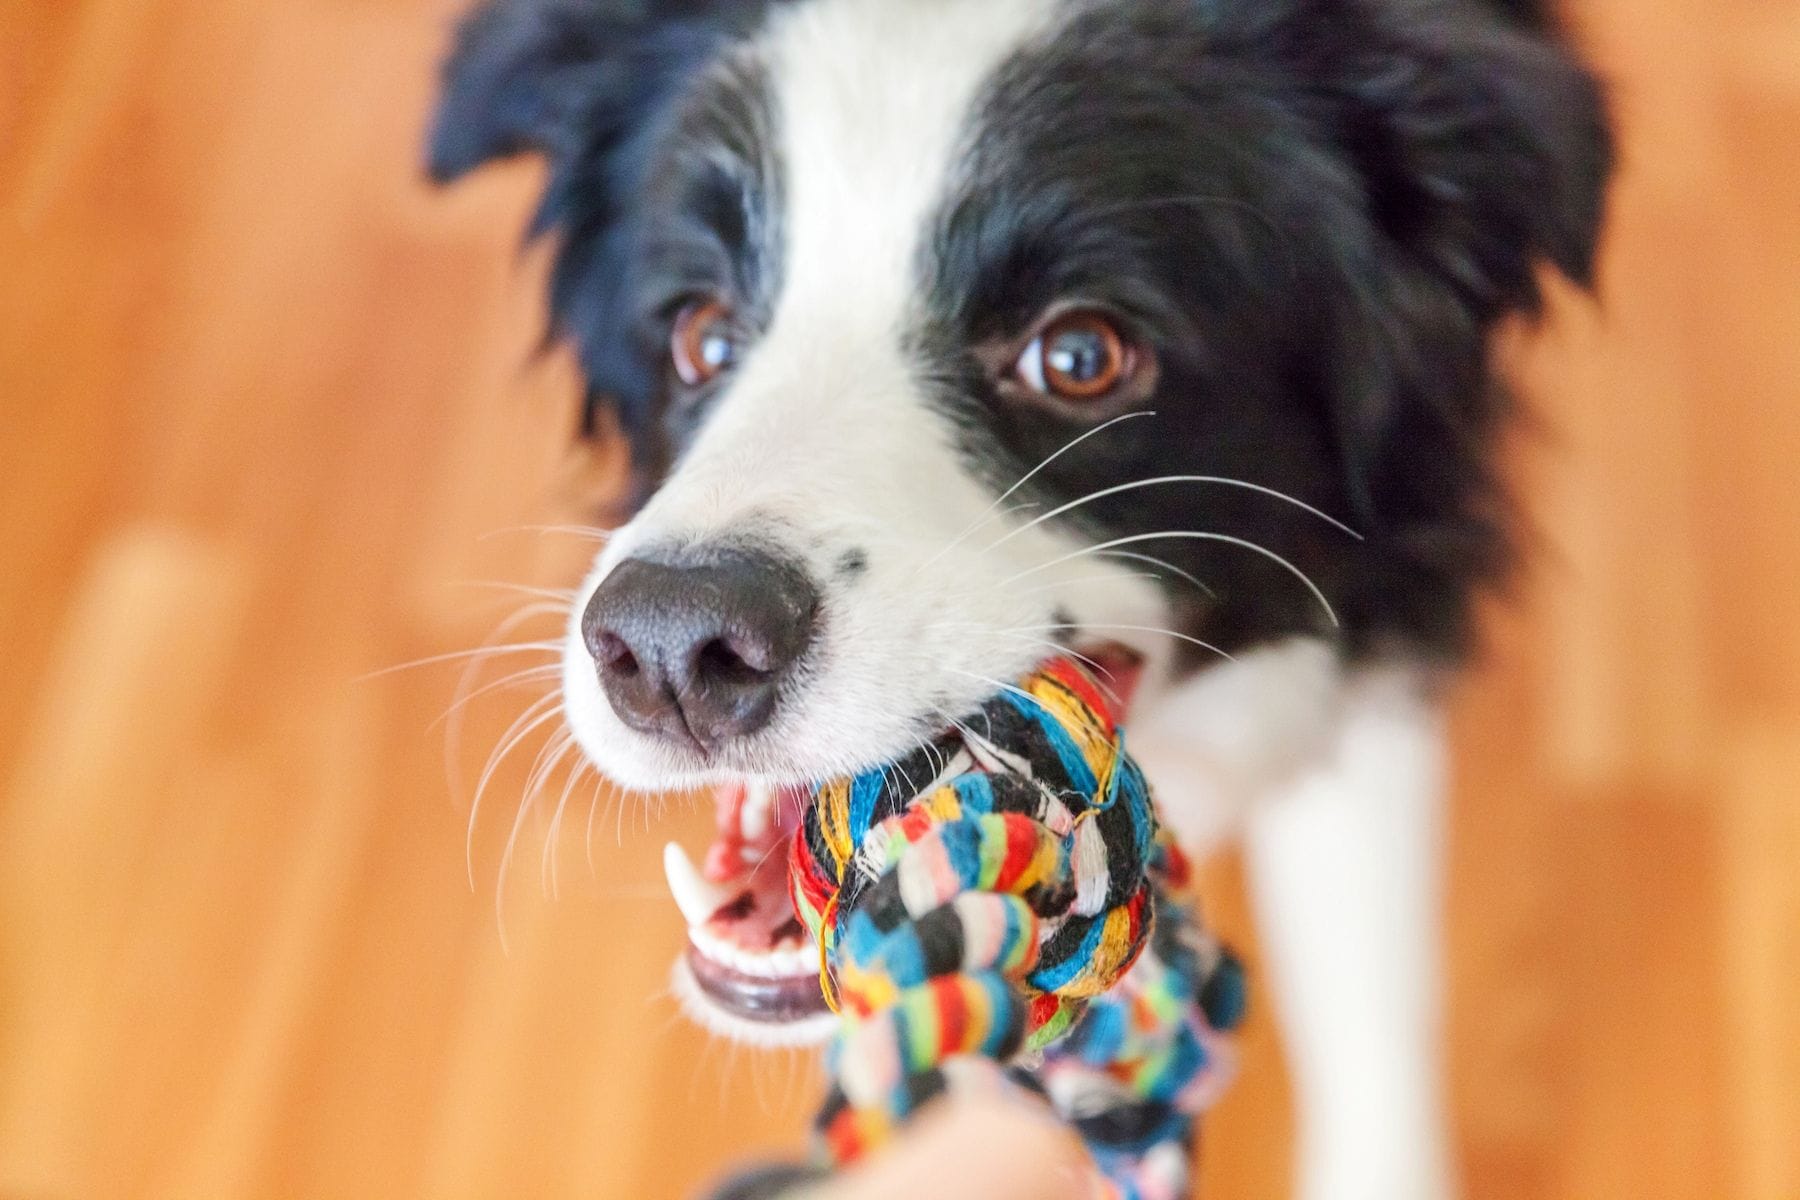 17 DIY dog toys you can make from items in your house